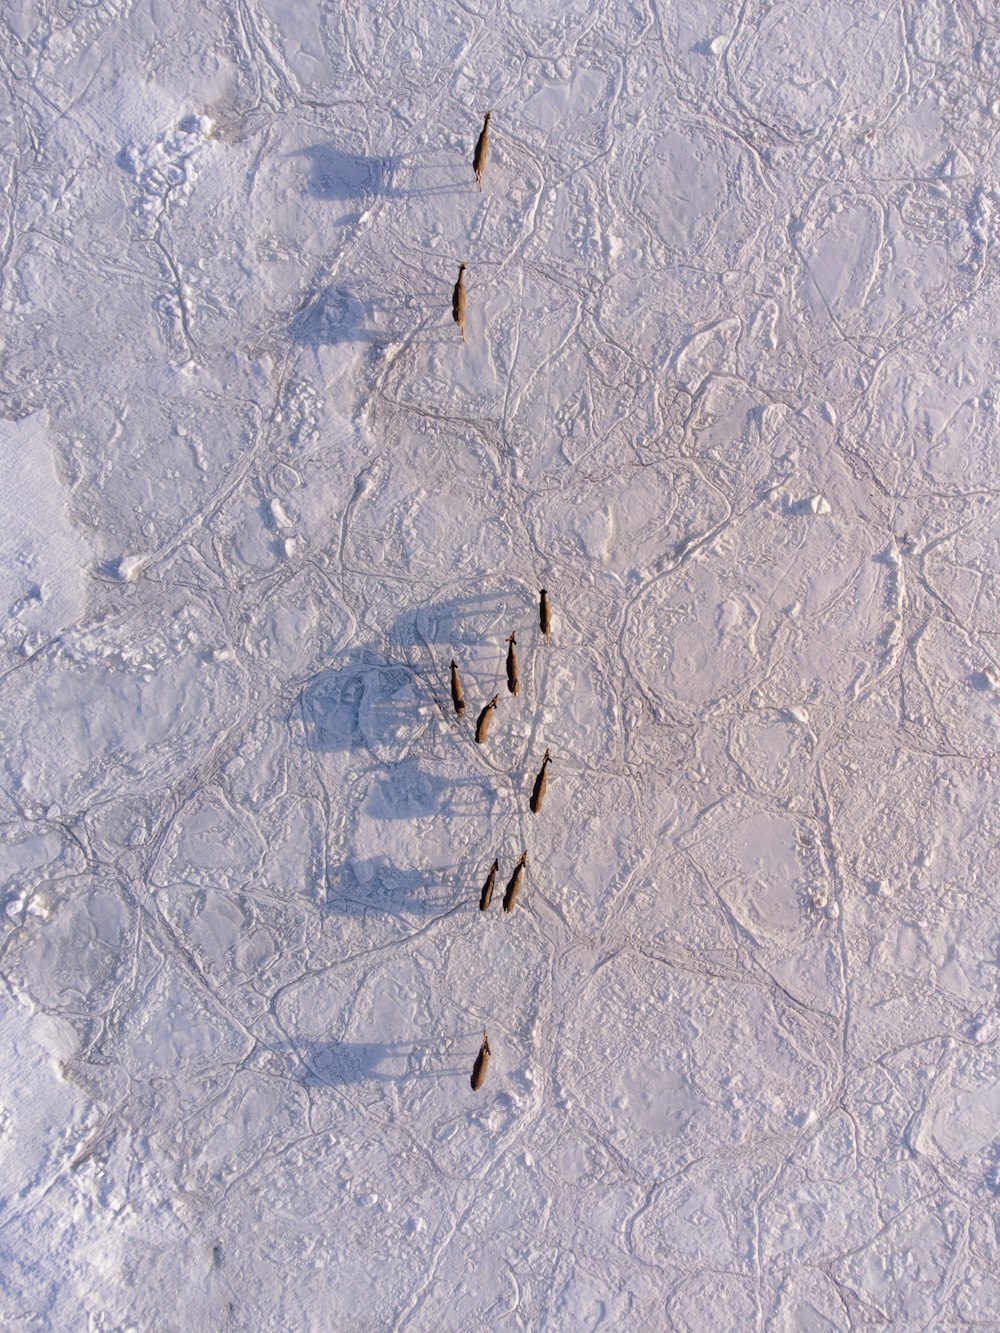 a group of birds walking across a snow covered field